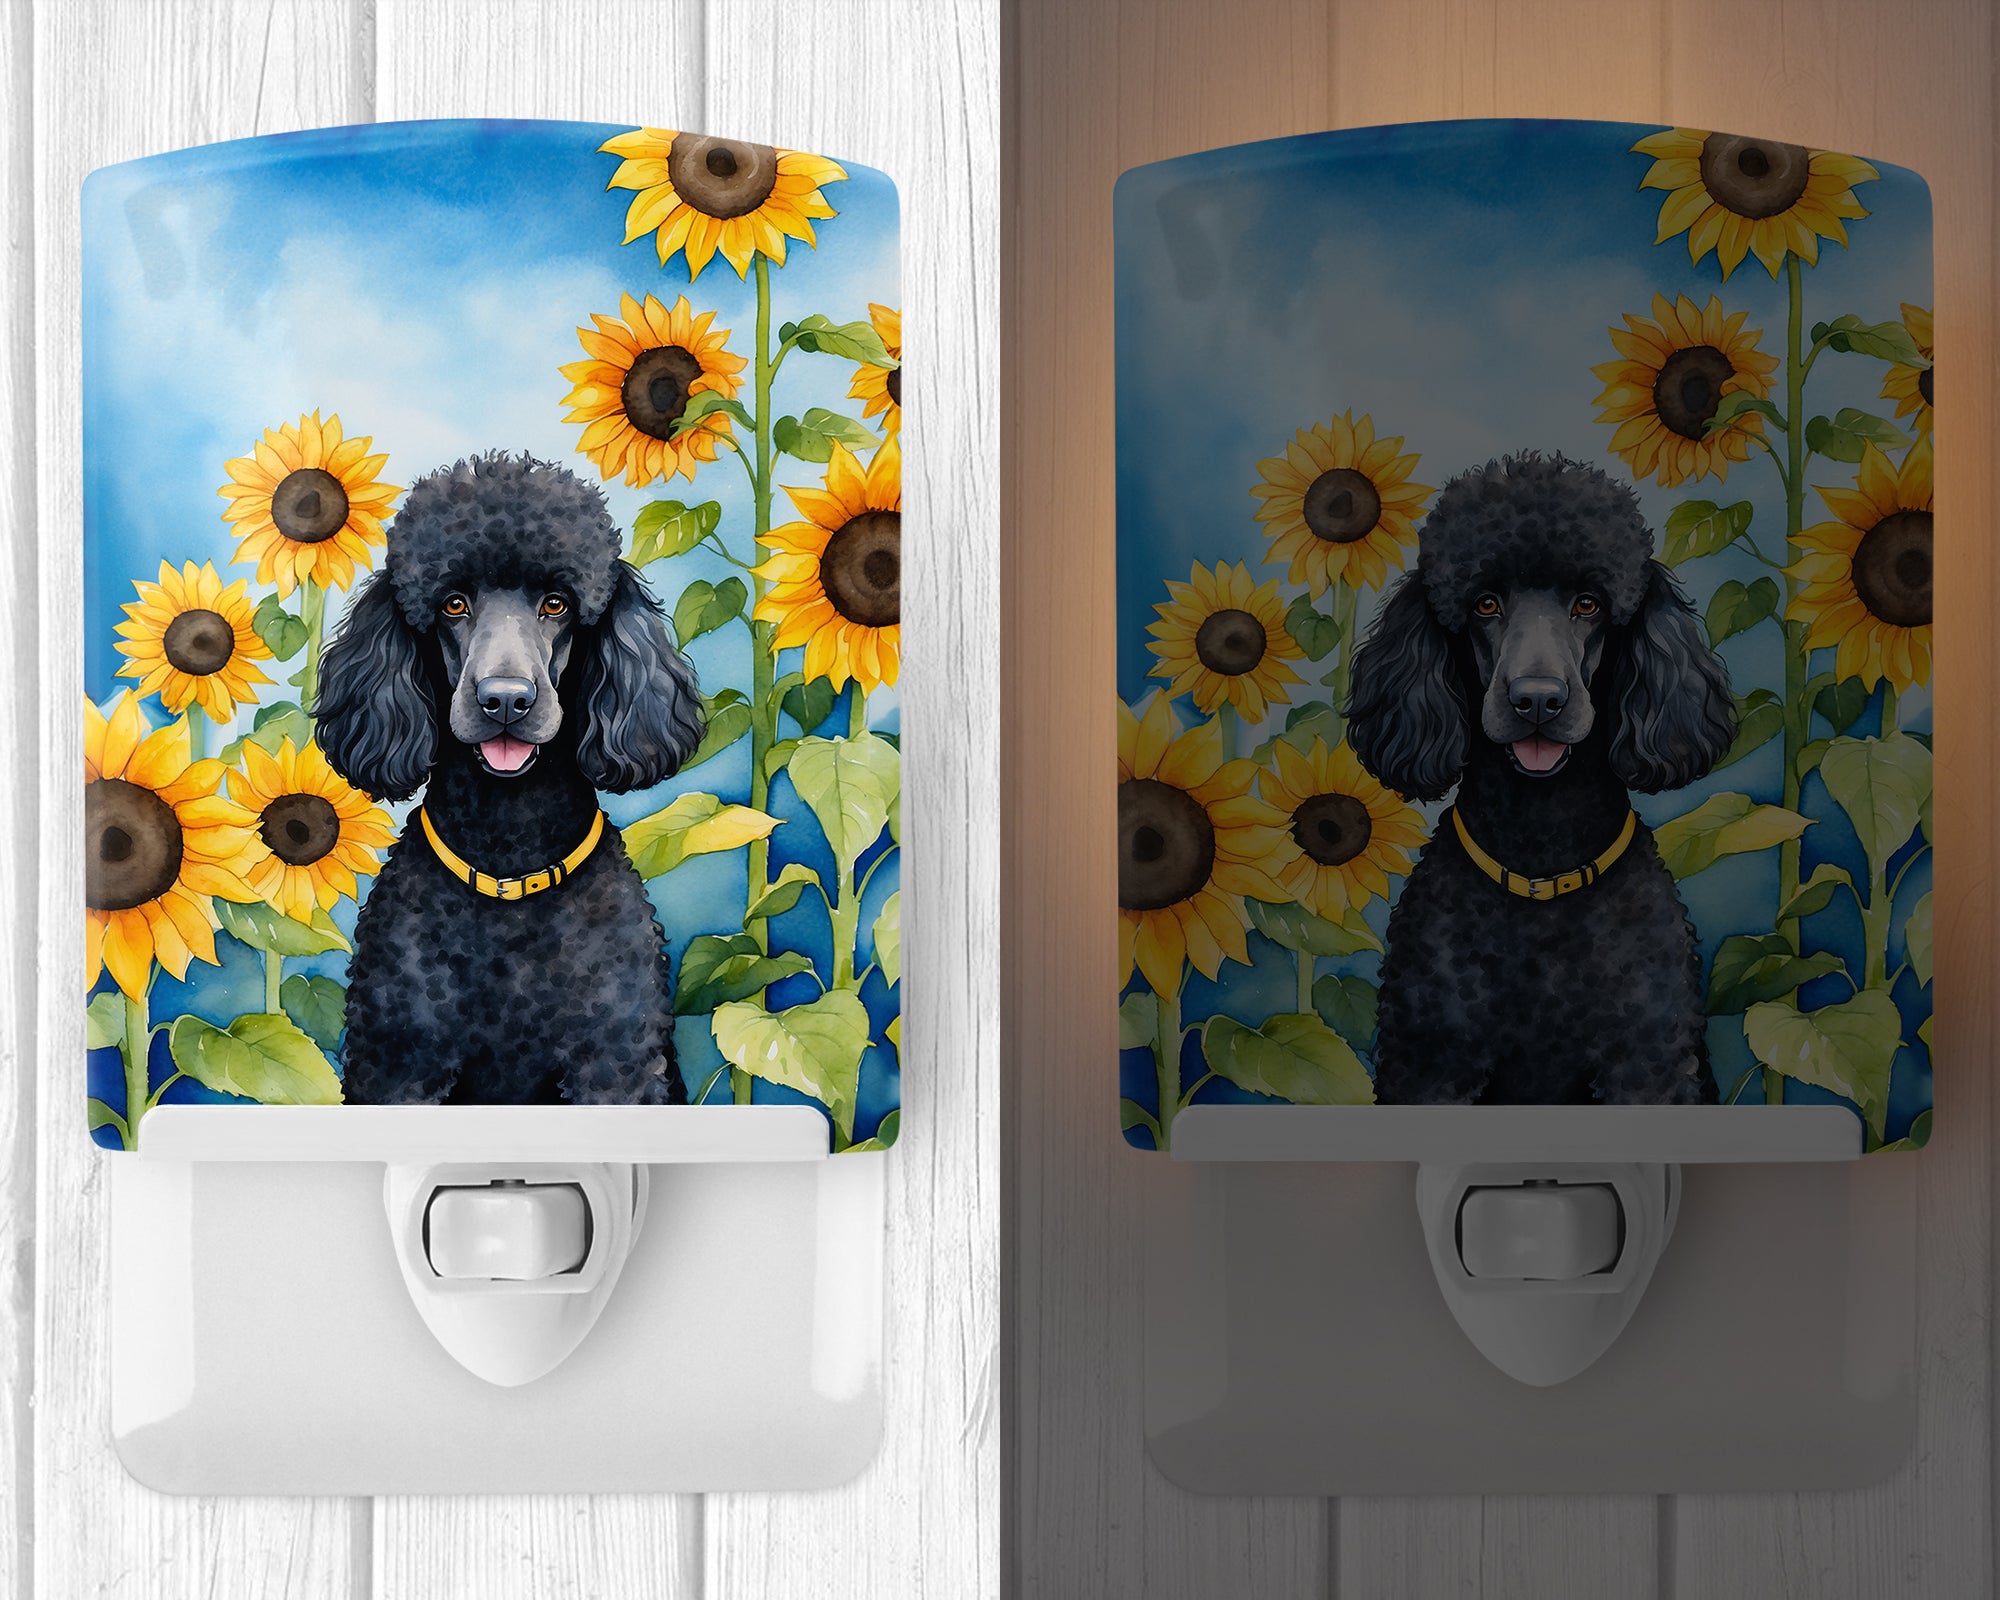 Buy this Black Poodle in Sunflowers Ceramic Night Light